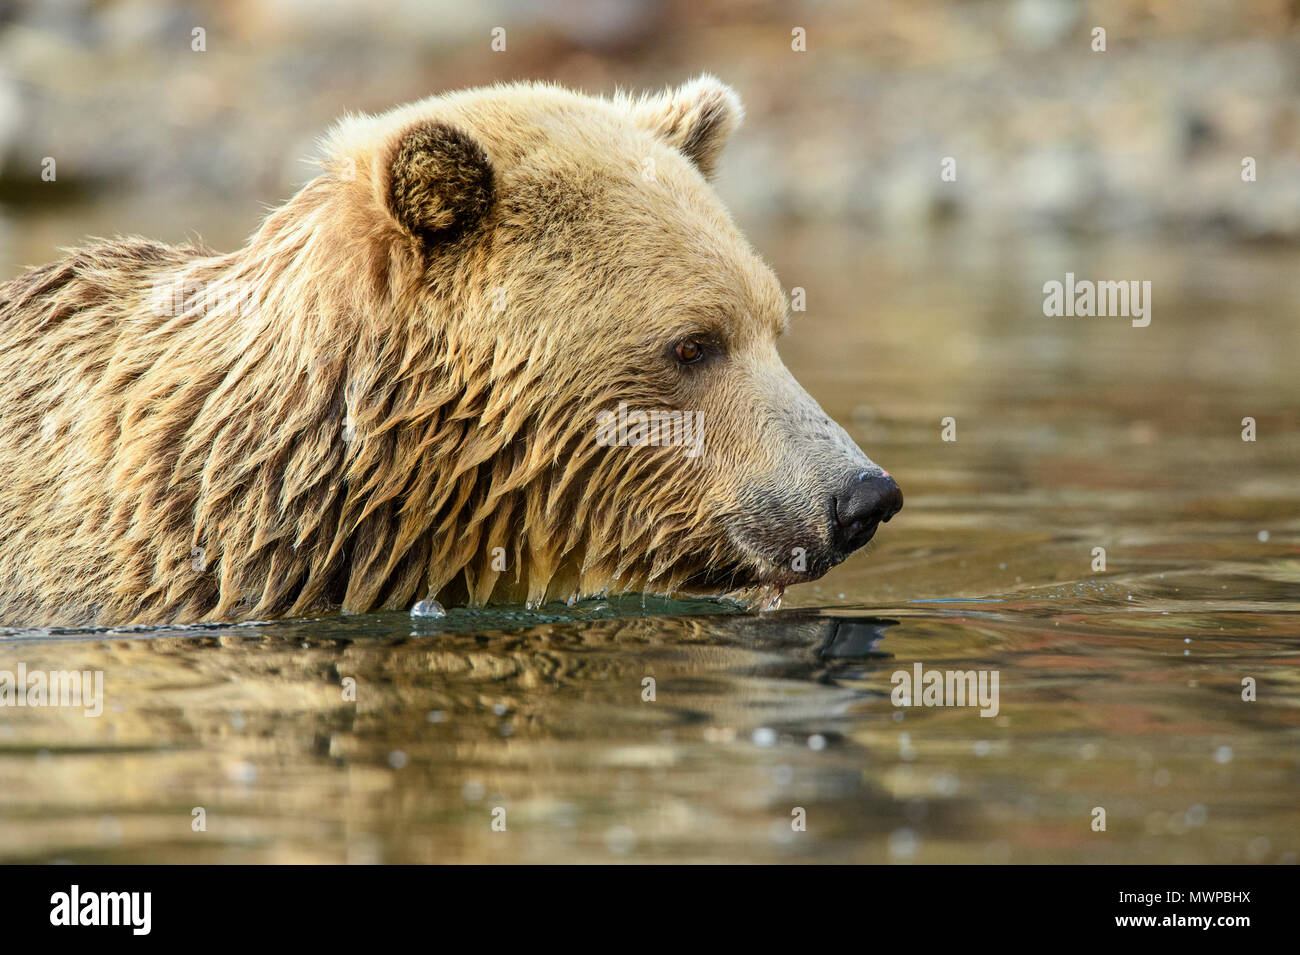 Grizzly bear (Ursus arctos)- Hunting for sockeye salmon in the Chilko River, Chilcotin Wilderness, British Columbia BC, Canada Stock Photo